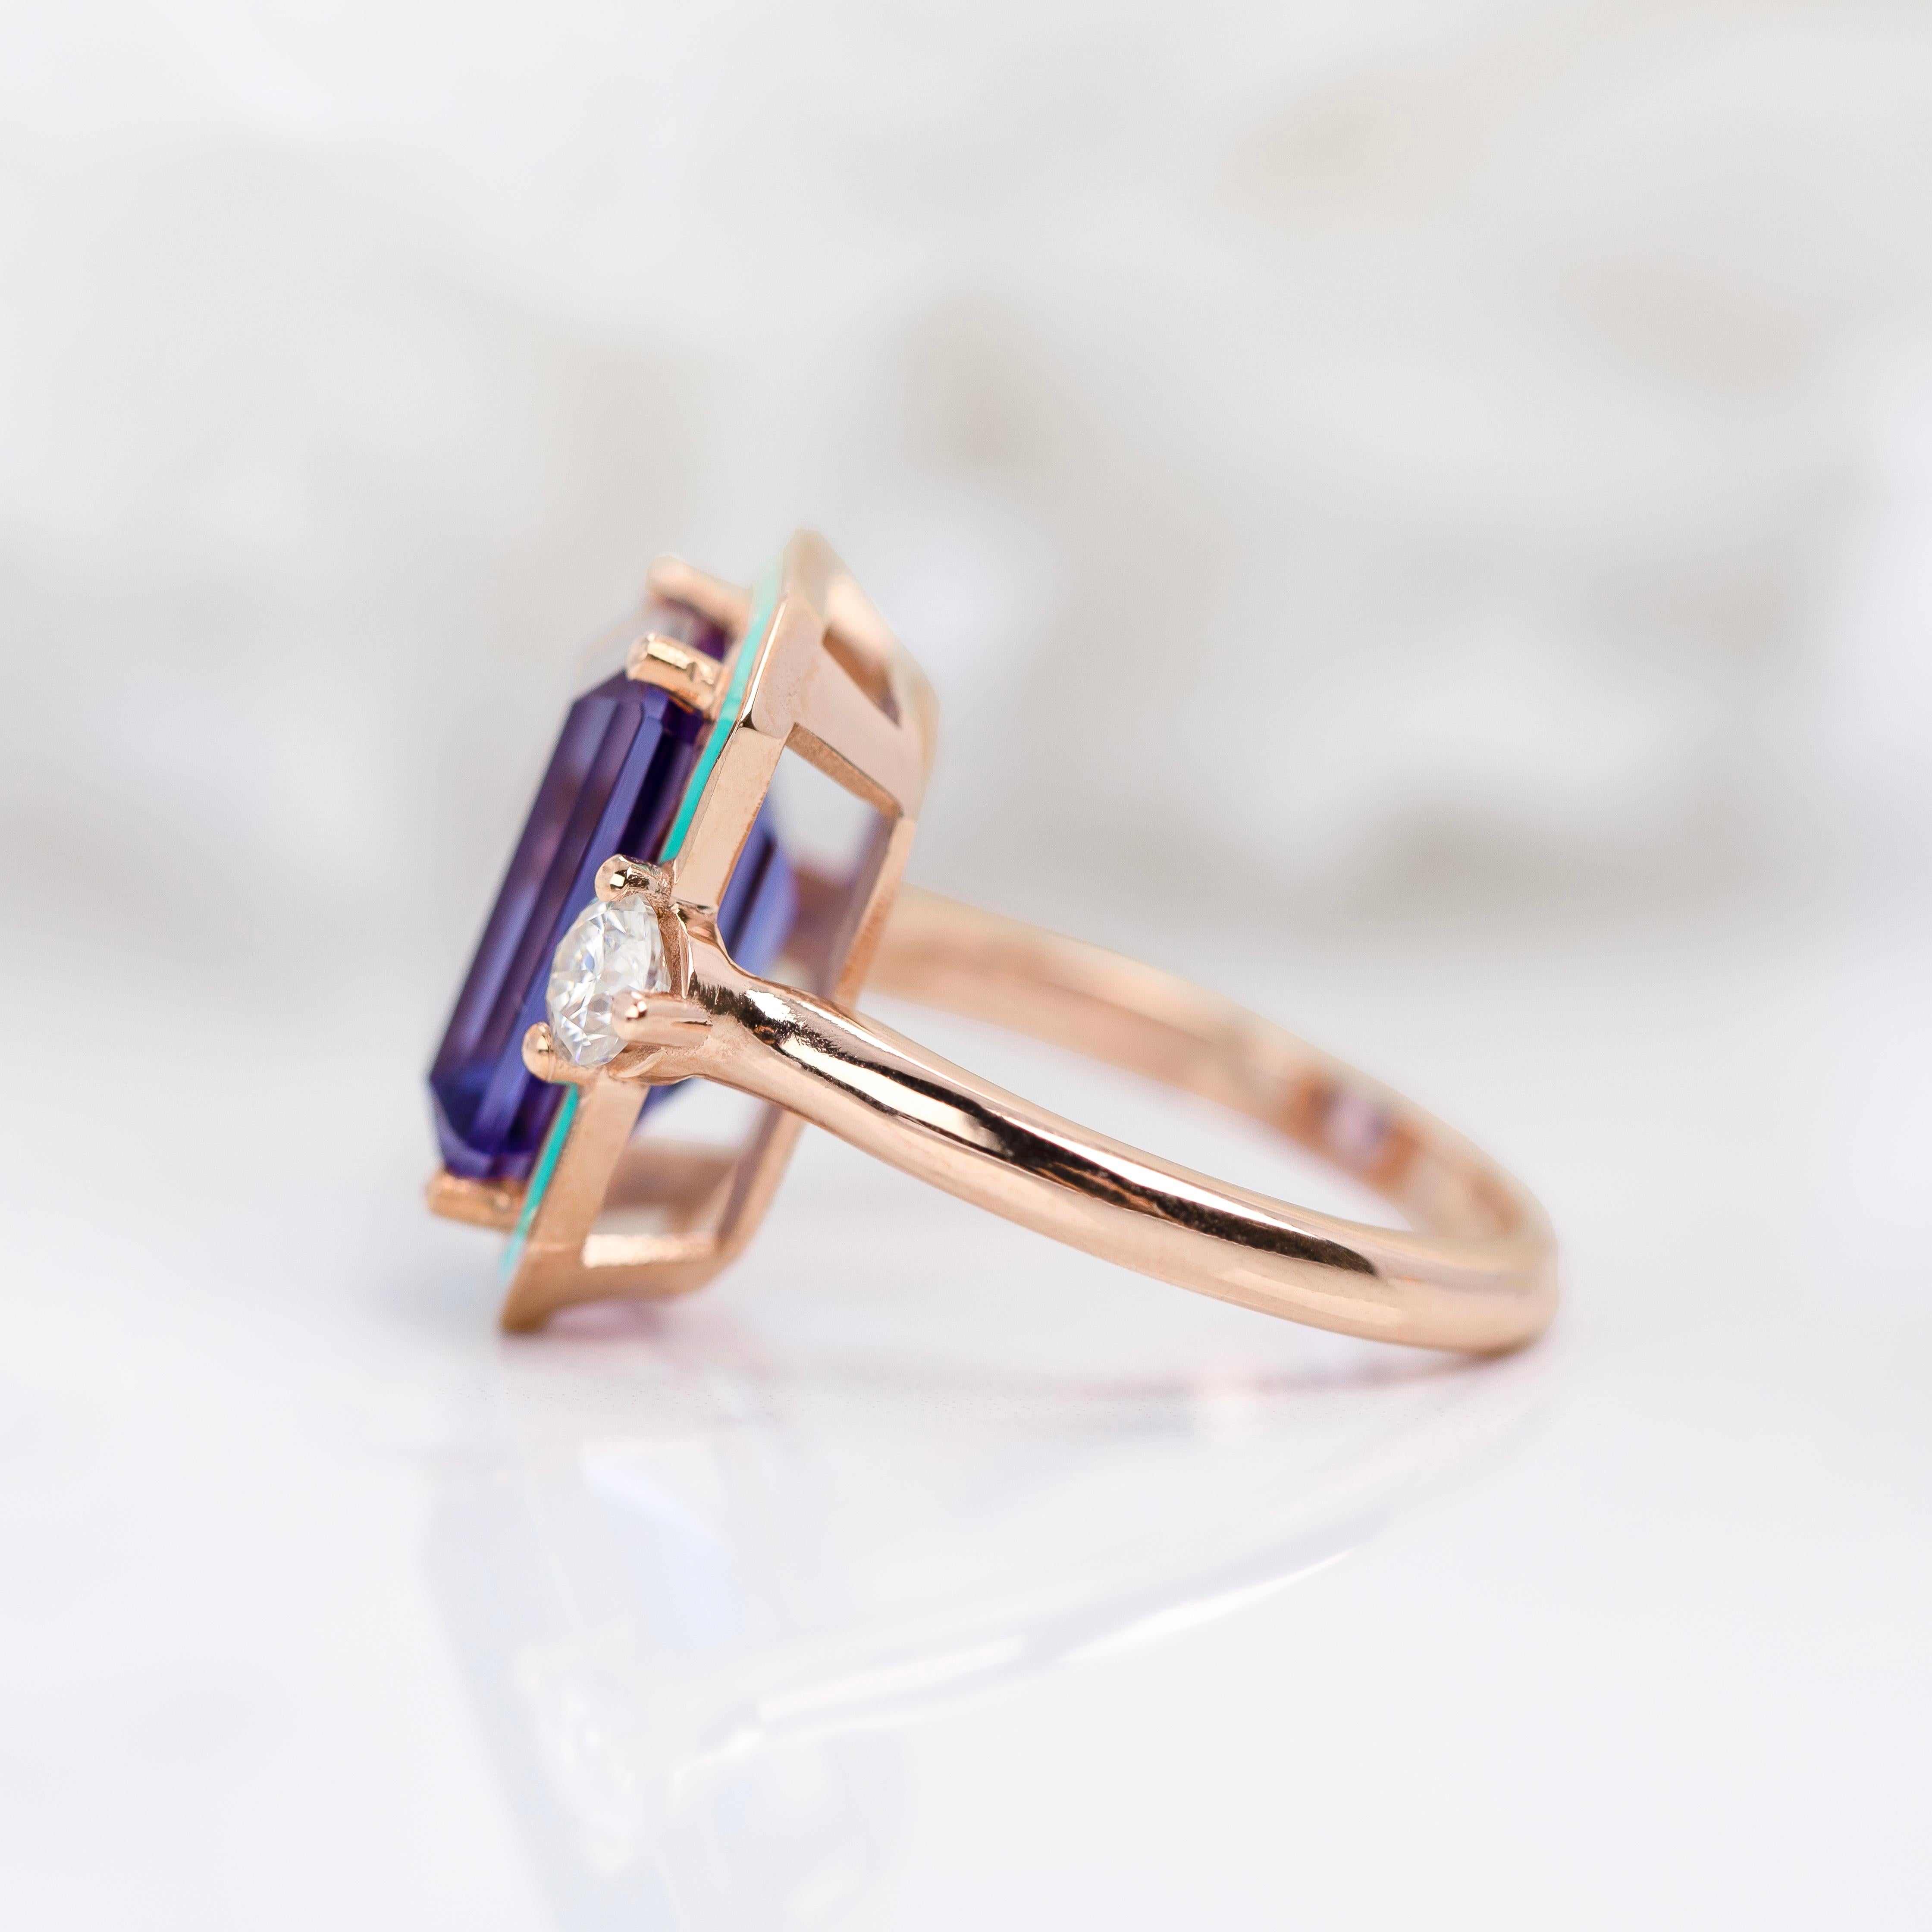 Emerald Cut Art Deco Style, Tanzanite and Moissanite Stone Ring, 14K Gold Ring For Sale